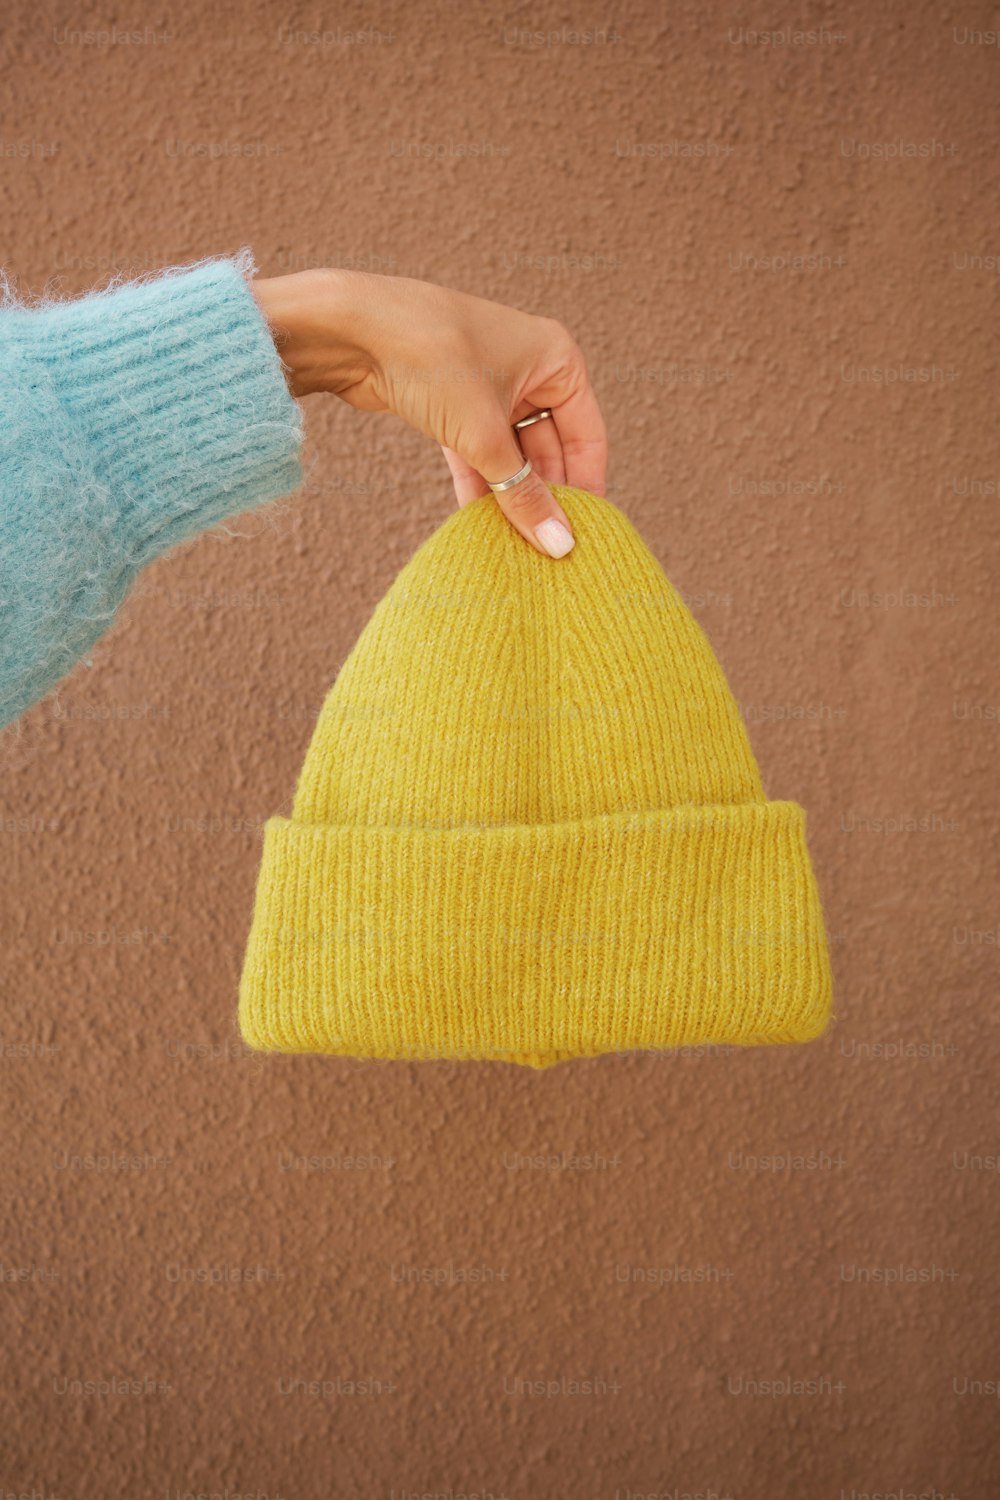 a person holding a yellow hat in their hand